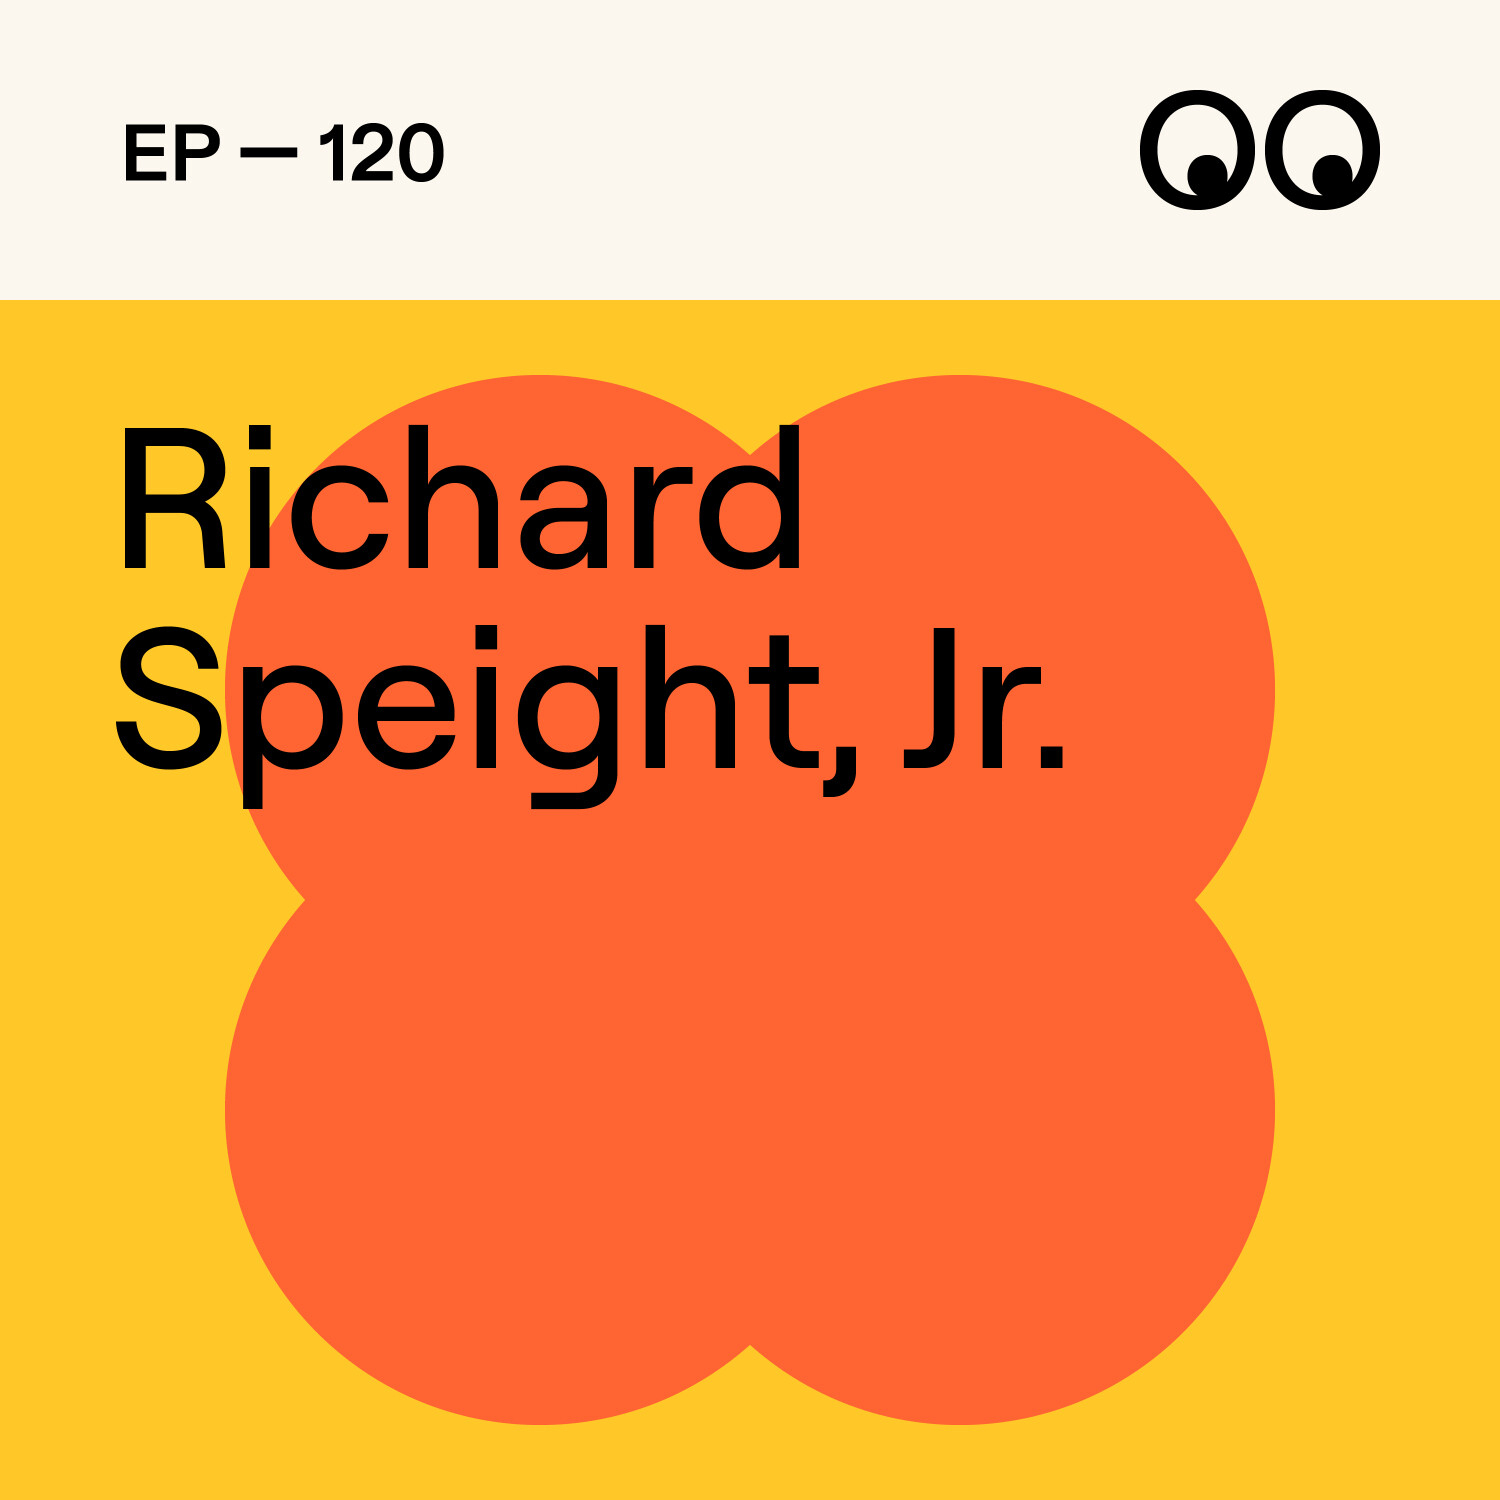 Embracing Fun: The fuel for creative sparks, with Richard Speight, Jr.